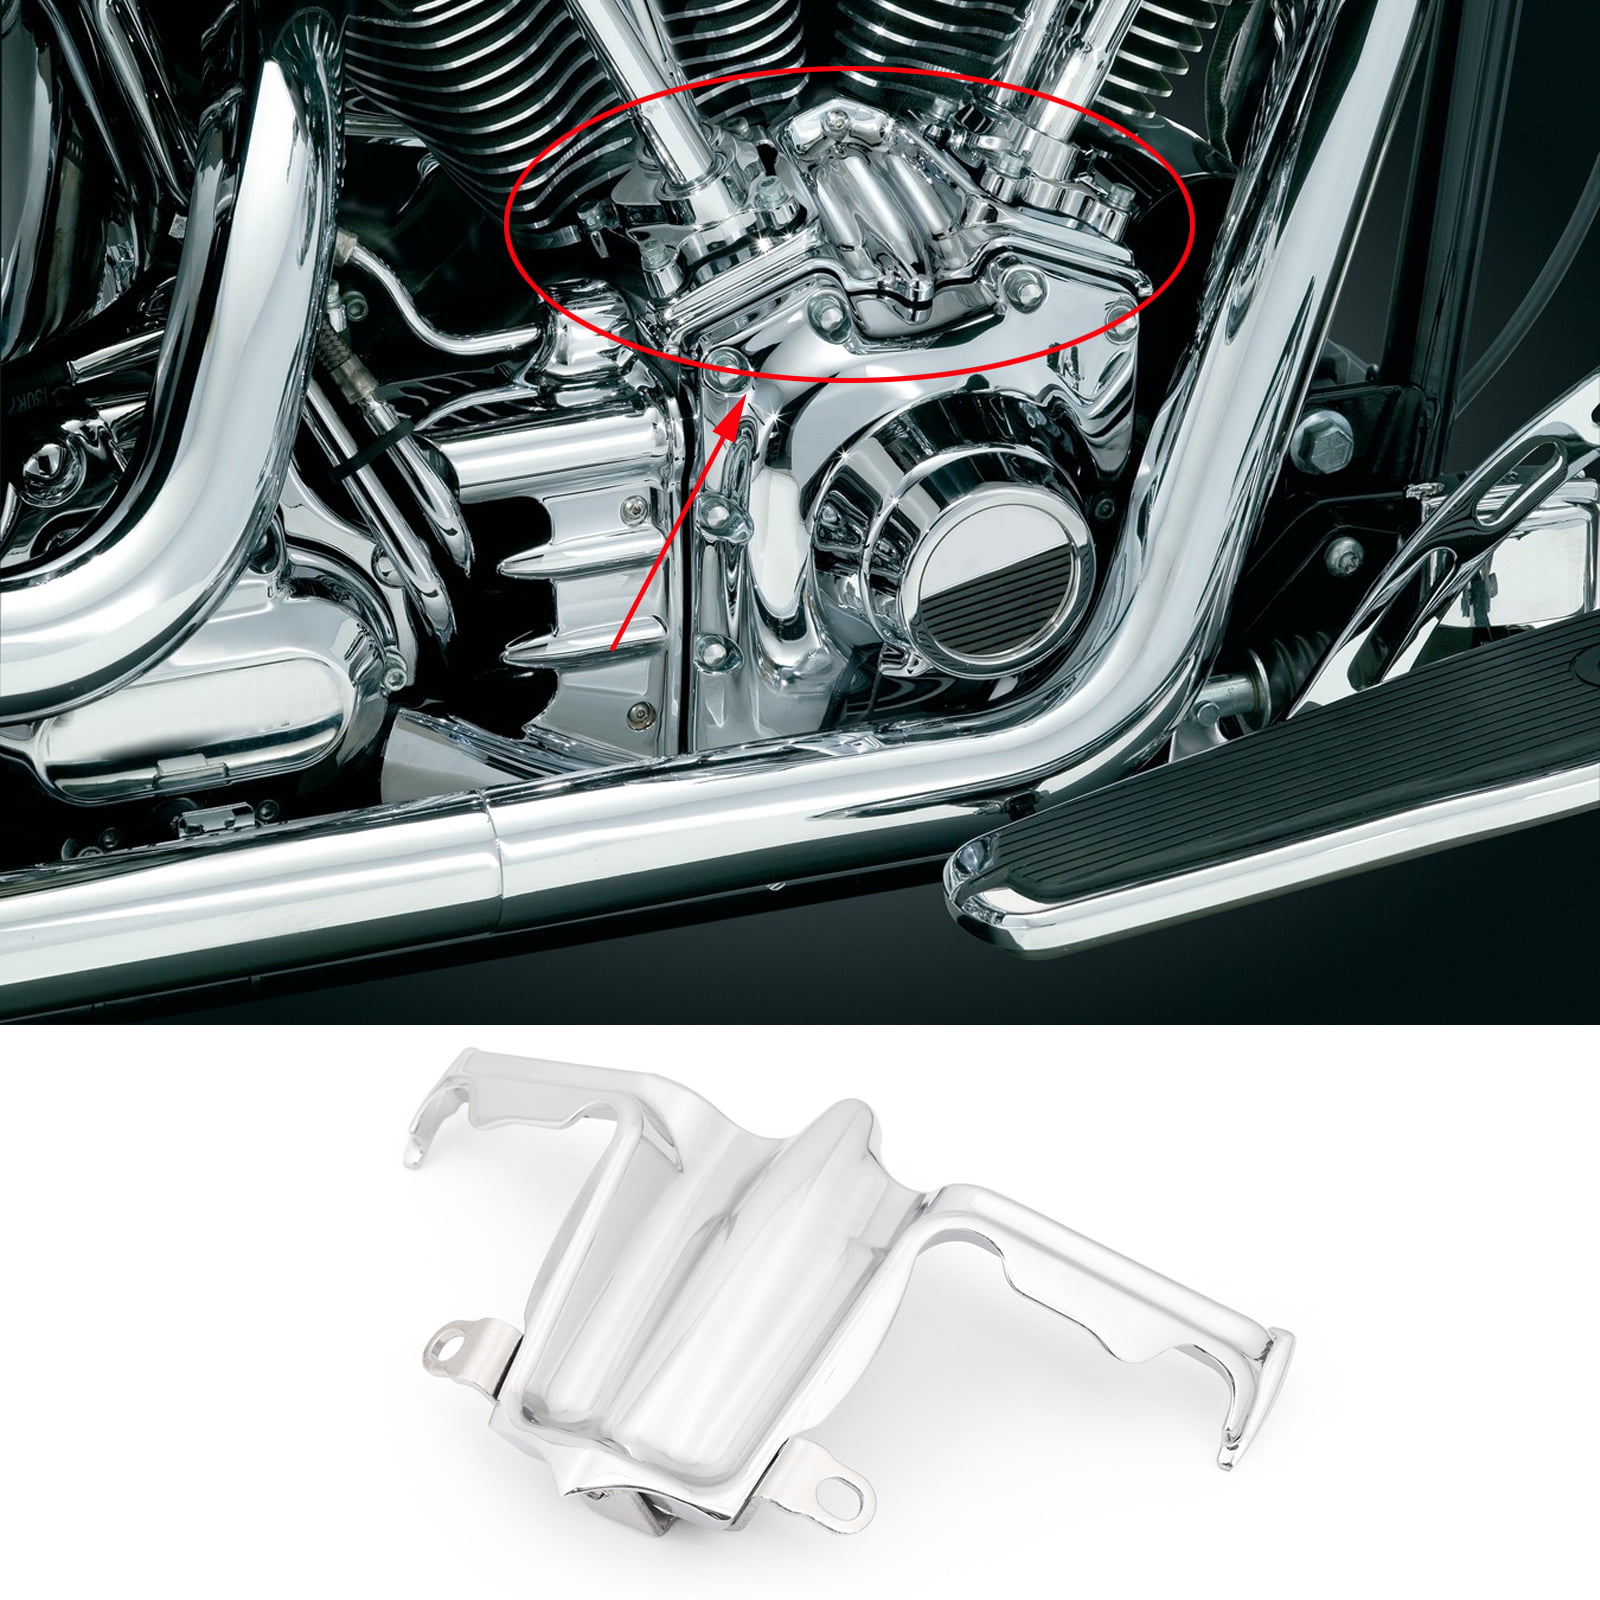 SHINY NUTZ 2009-16 HARLEY ROAD KING CHROME COVER Toppers STARTER DRESS UP KIT 